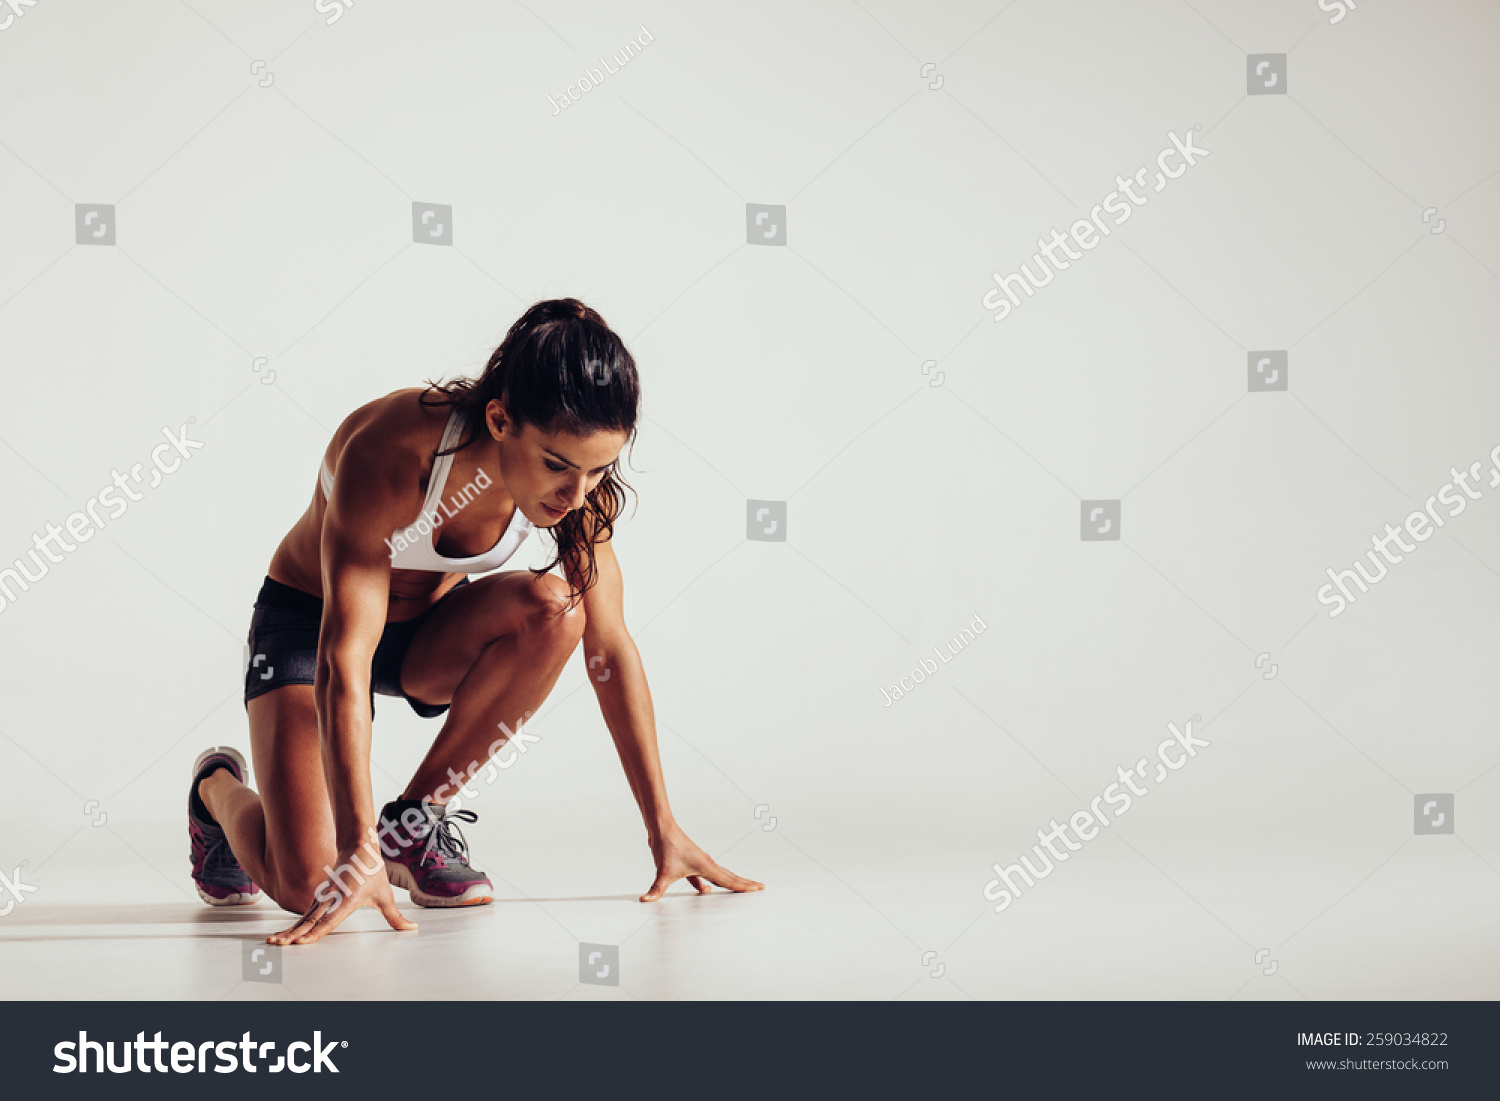 Healthy young woman preparing for a run. Fit female athlete ready for a spring over grey background with copy space. #259034822